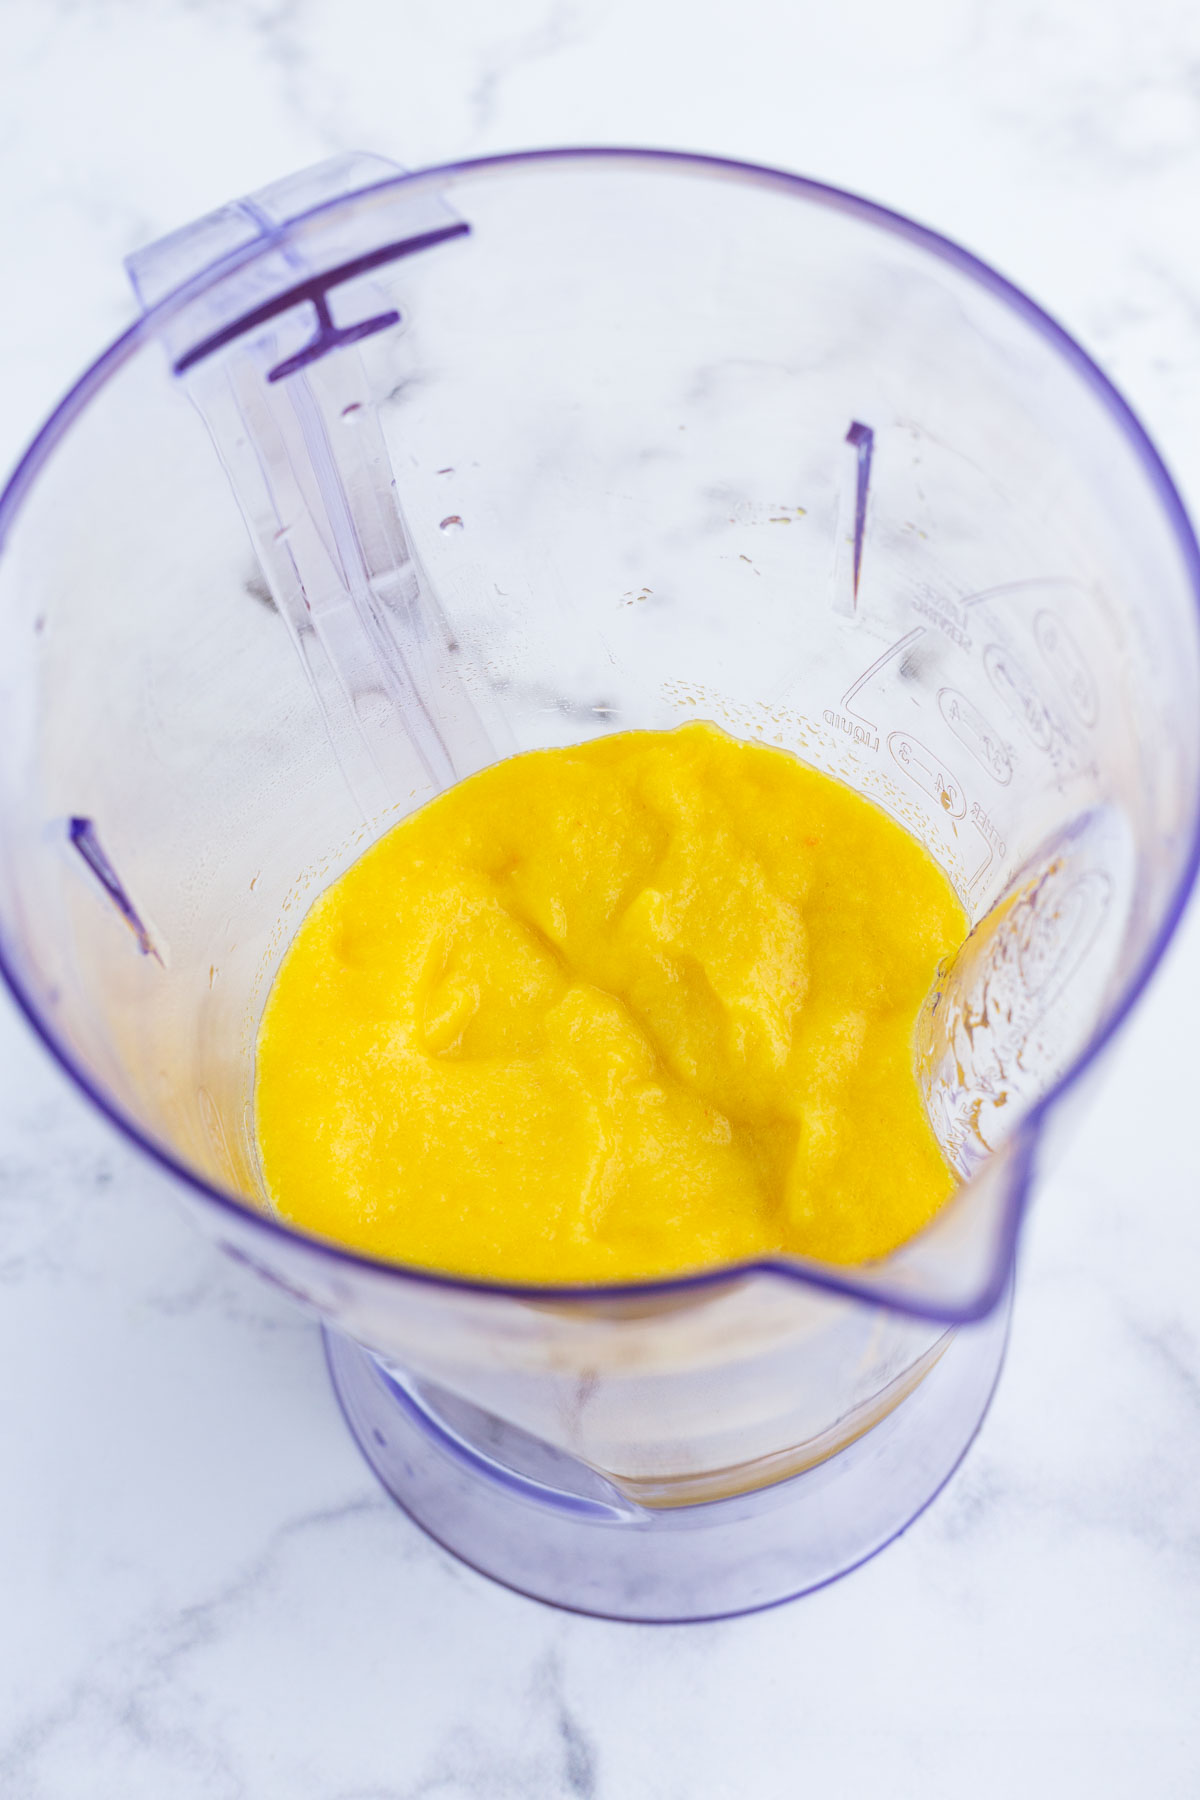 The sorbet mixture is blended until smooth.